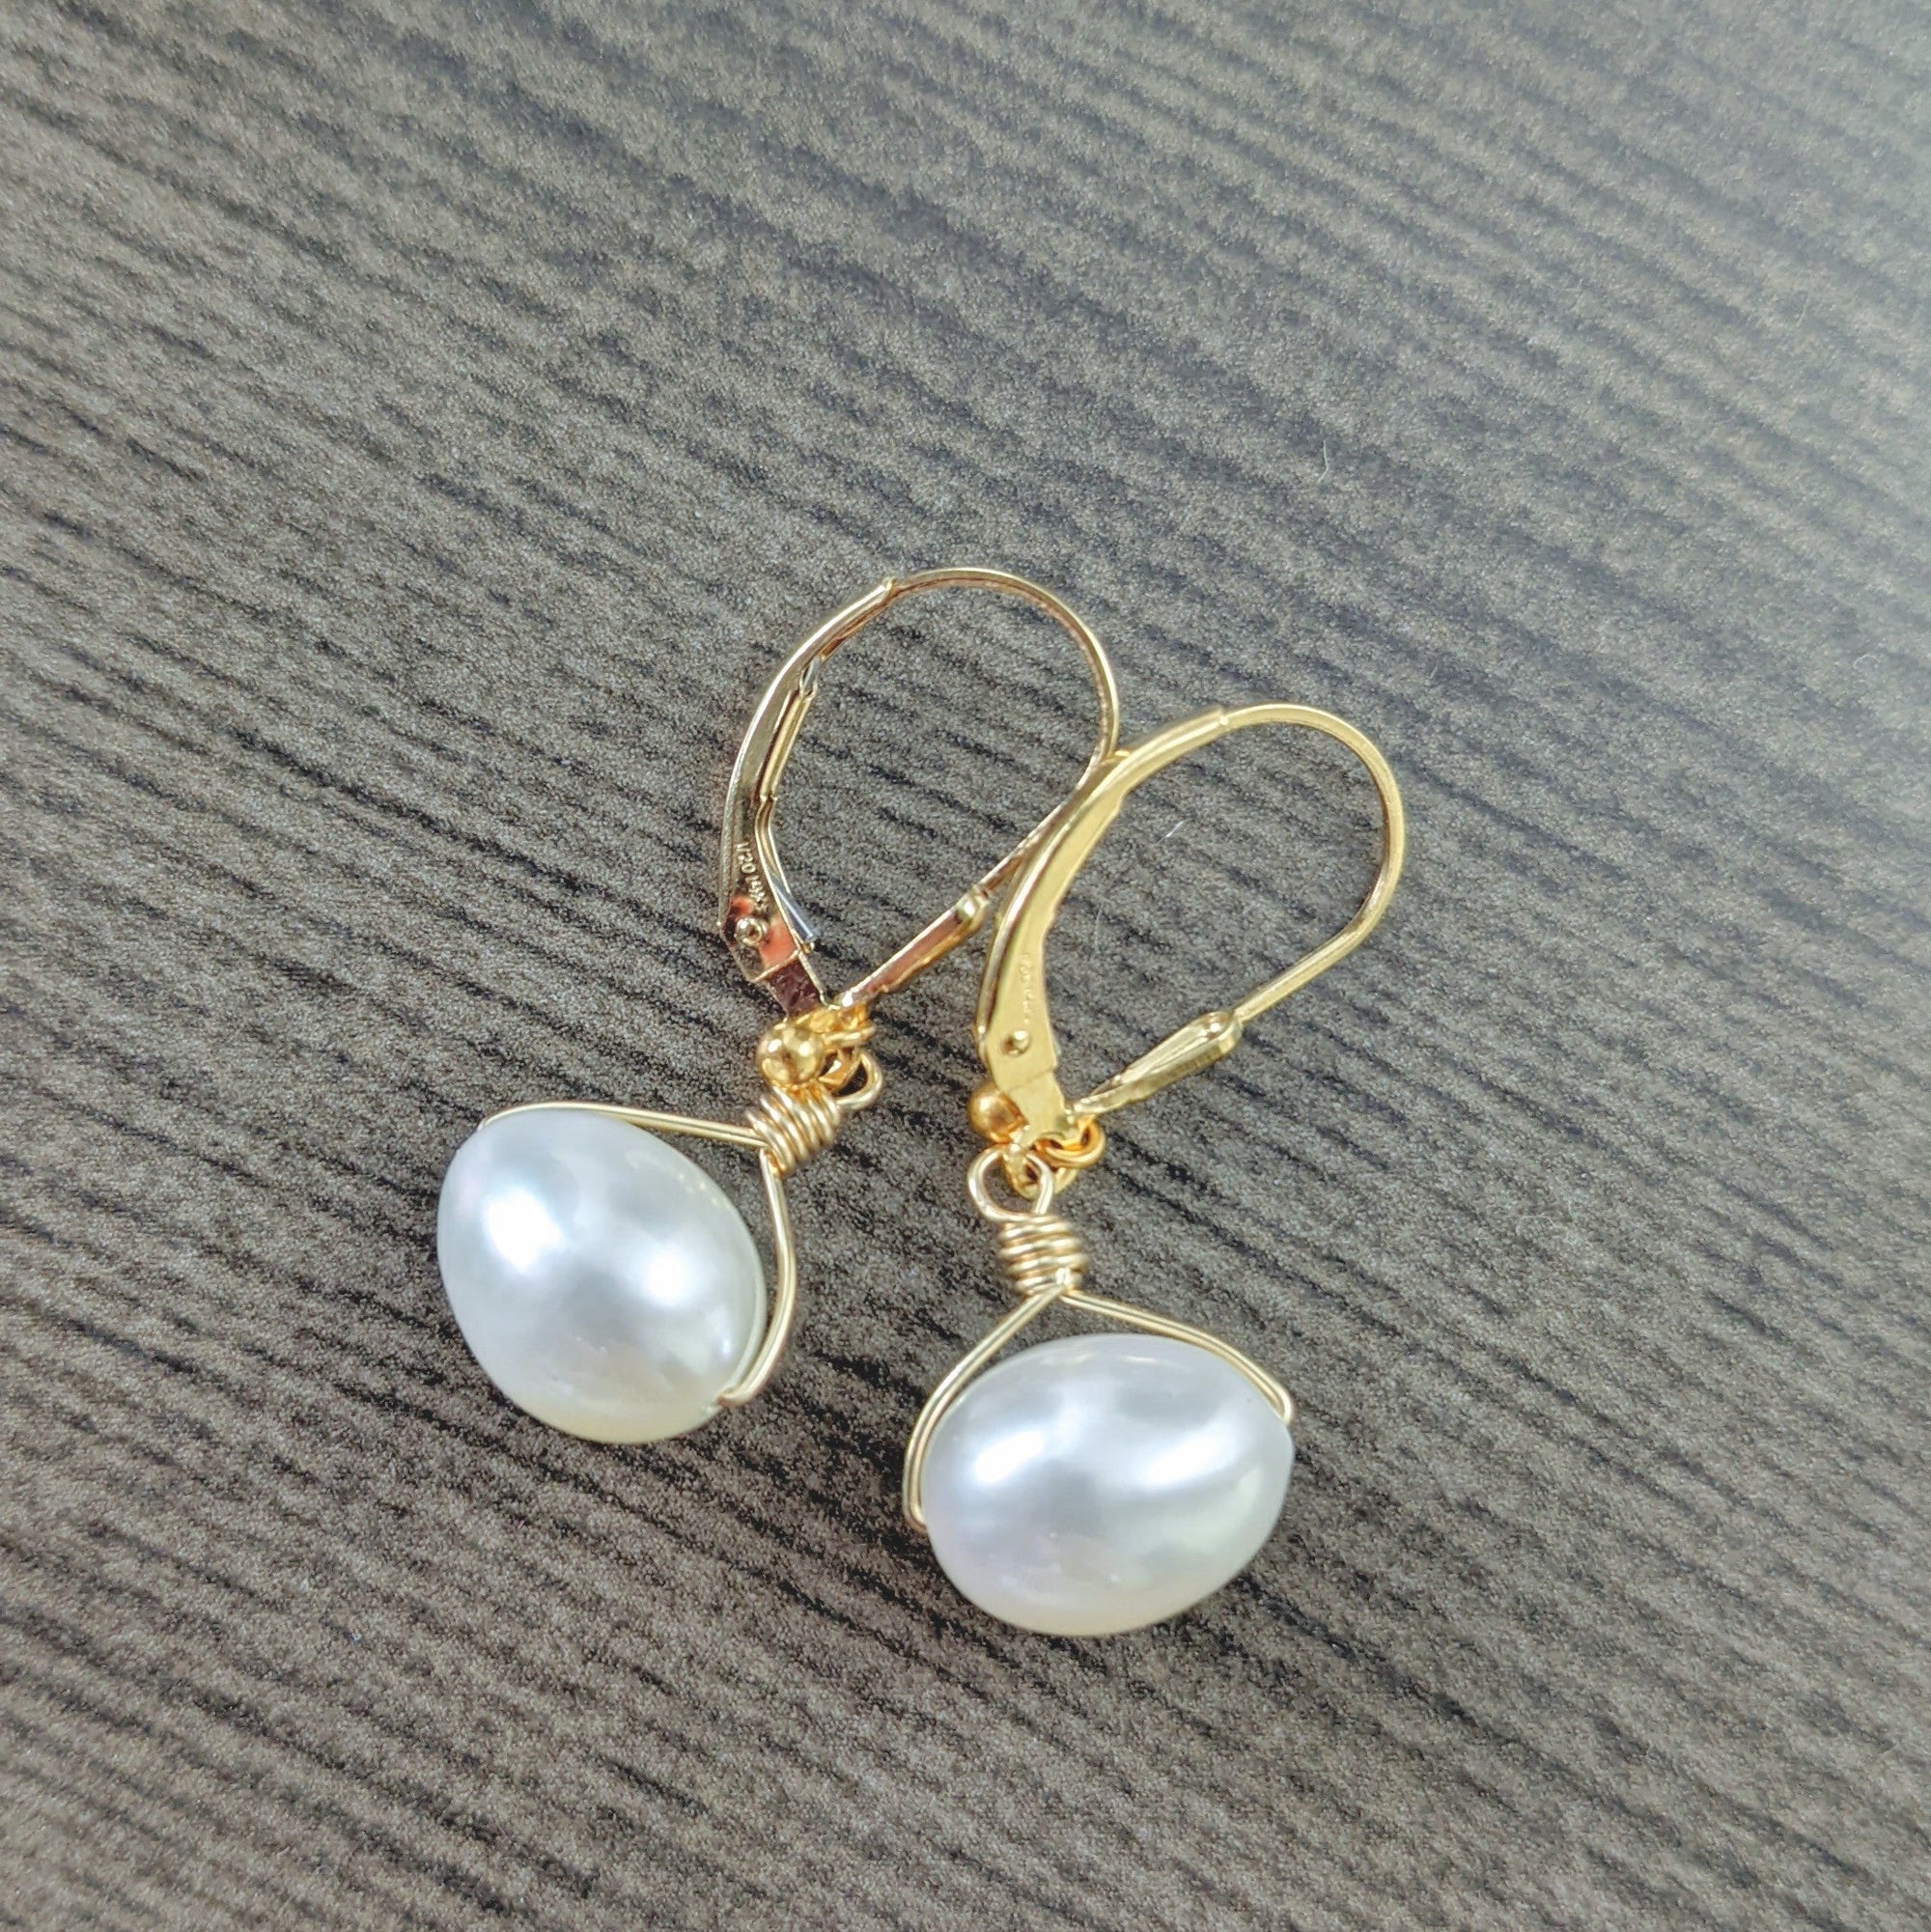 White freshwater pearl drop earrings wire wrapped in gold filled wire